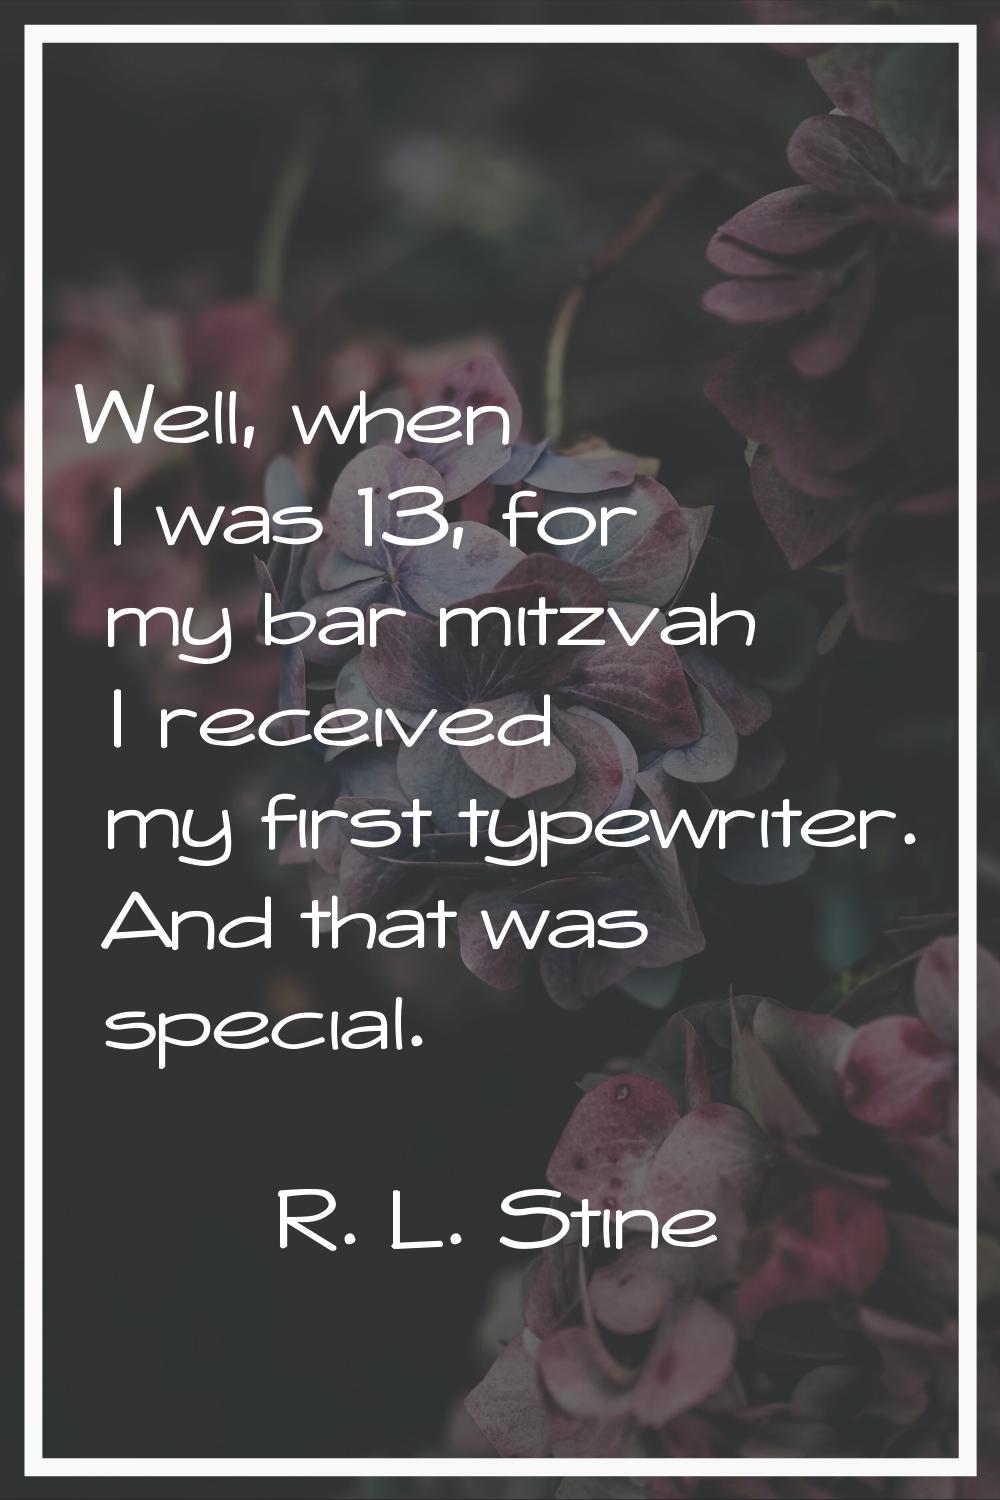 Well, when I was 13, for my bar mitzvah I received my first typewriter. And that was special.